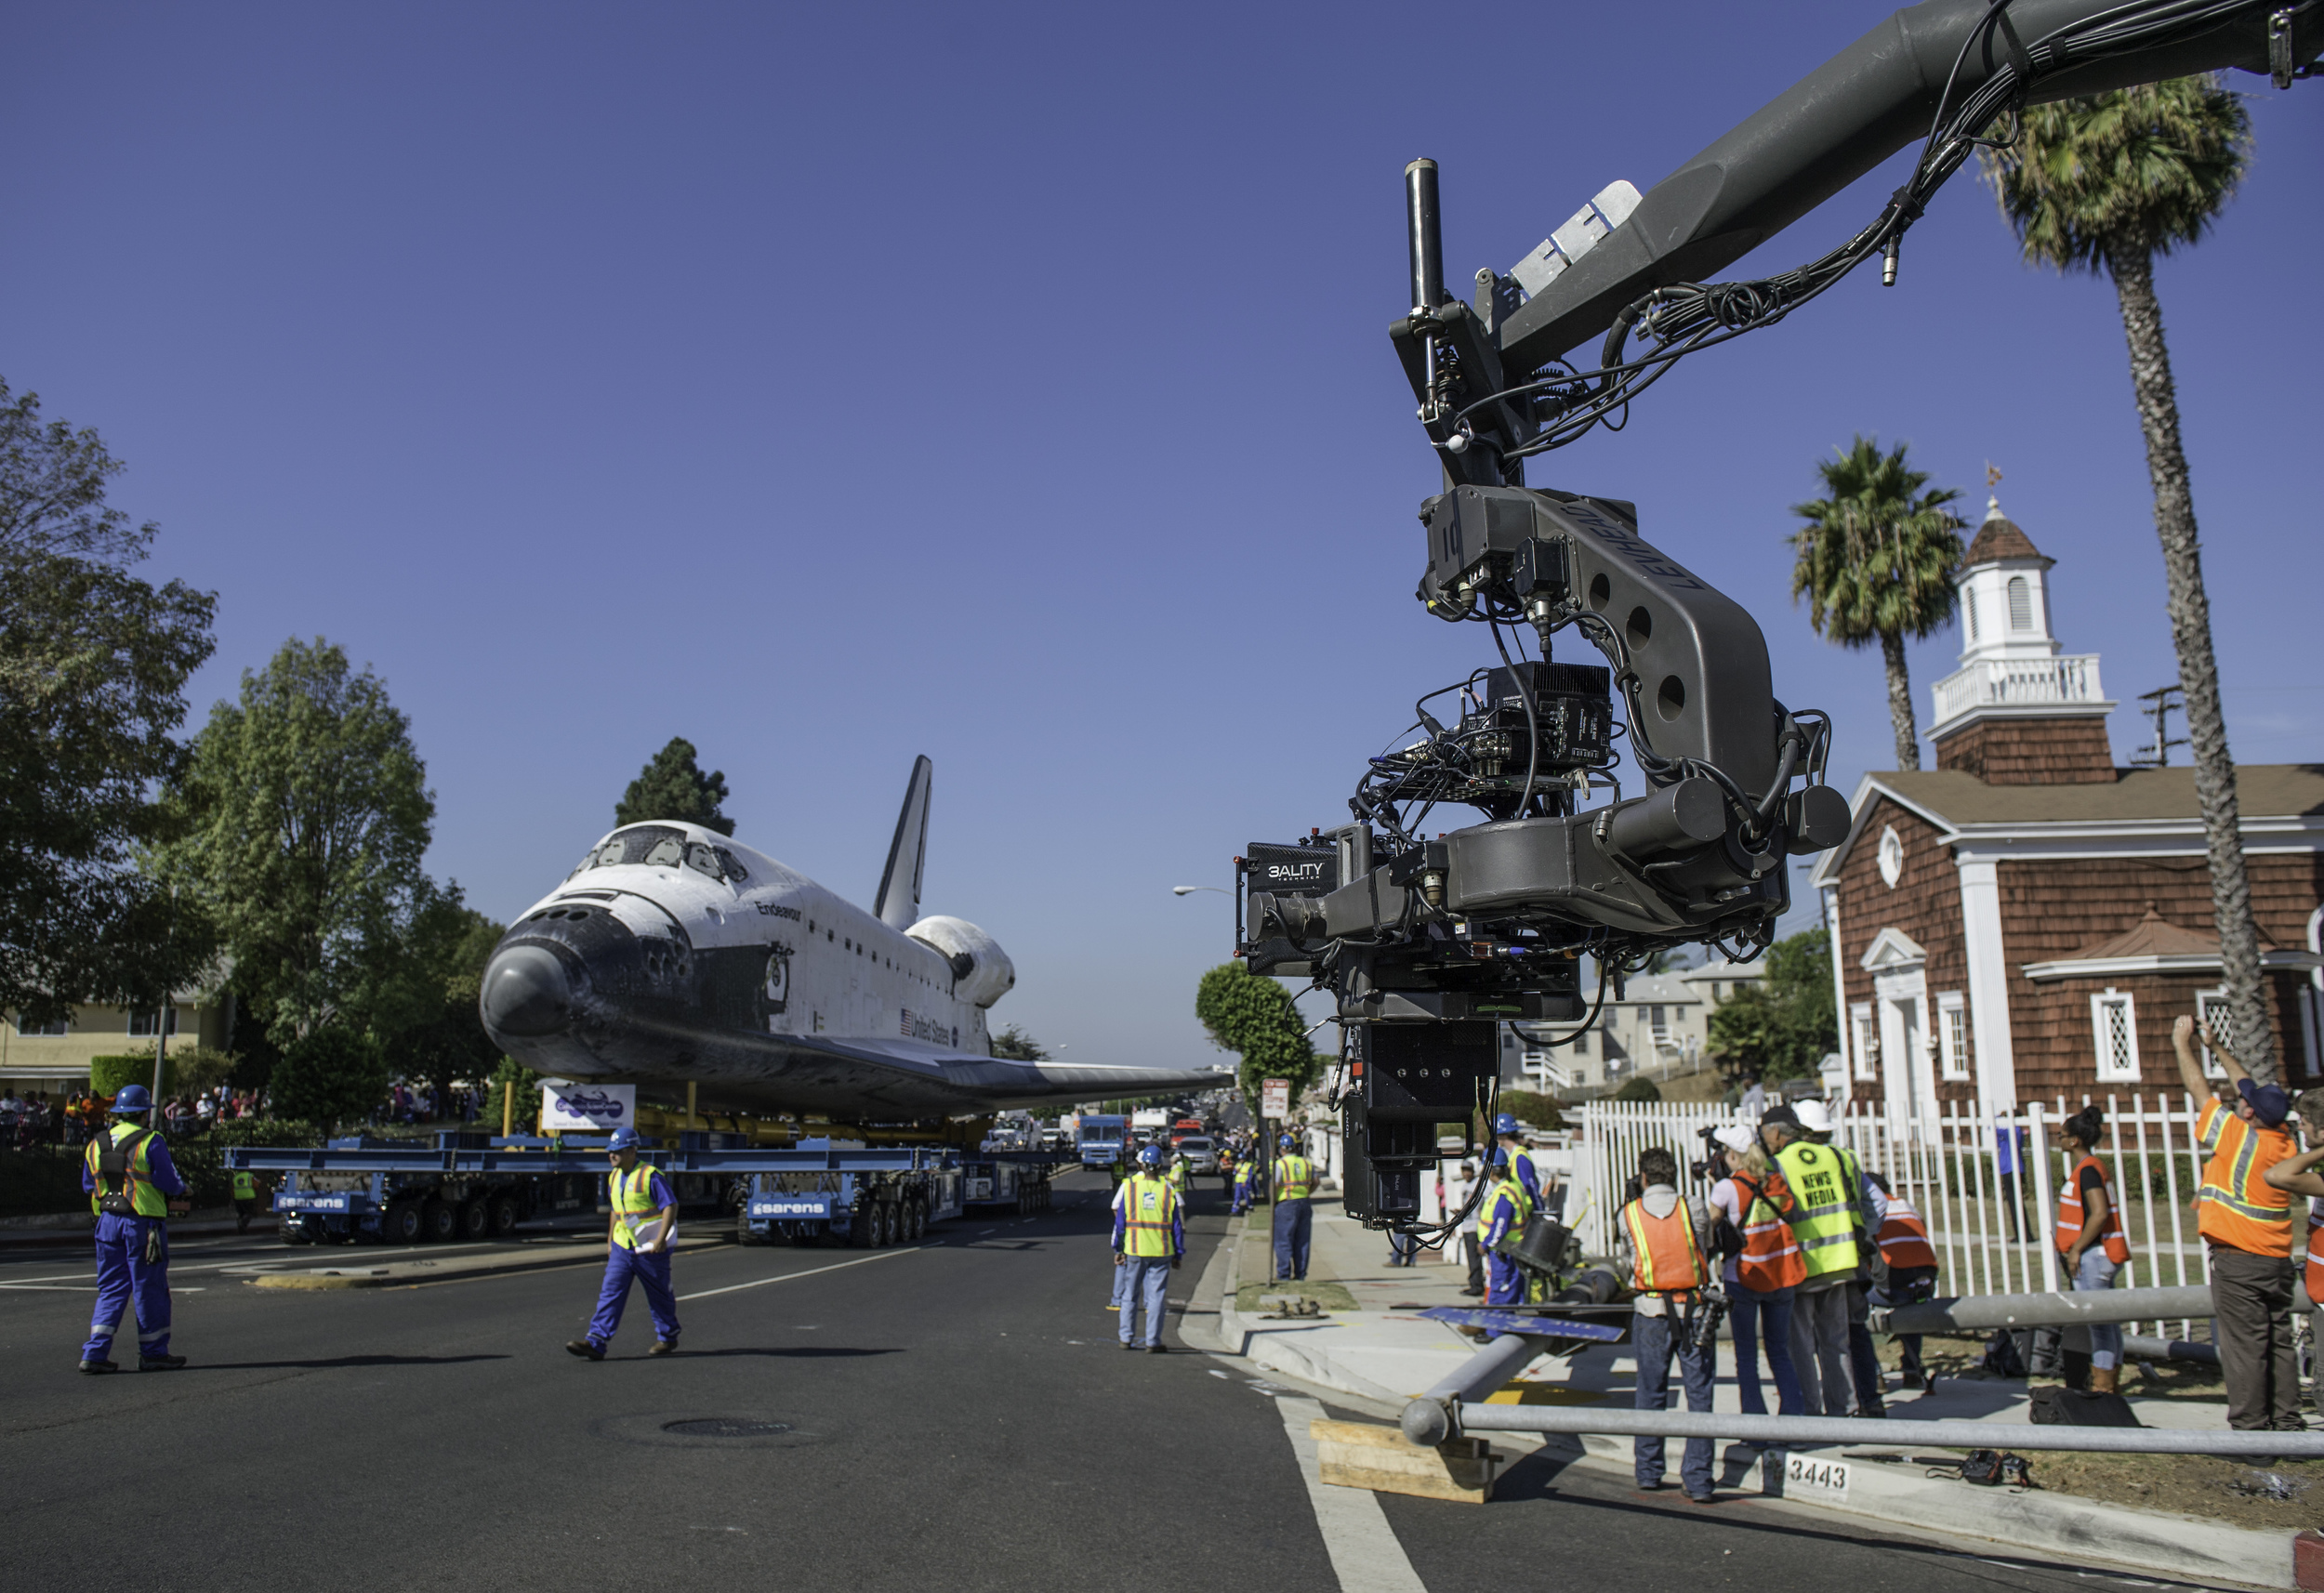  A 3D camera films the space shuttle Endeavour as it makes its way through the streets of Inglewood on its way to its new home at the California Science Center, Saturday, Oct. 13, 2012. Endeavour, built as a replacement for space shuttle Challenger, 